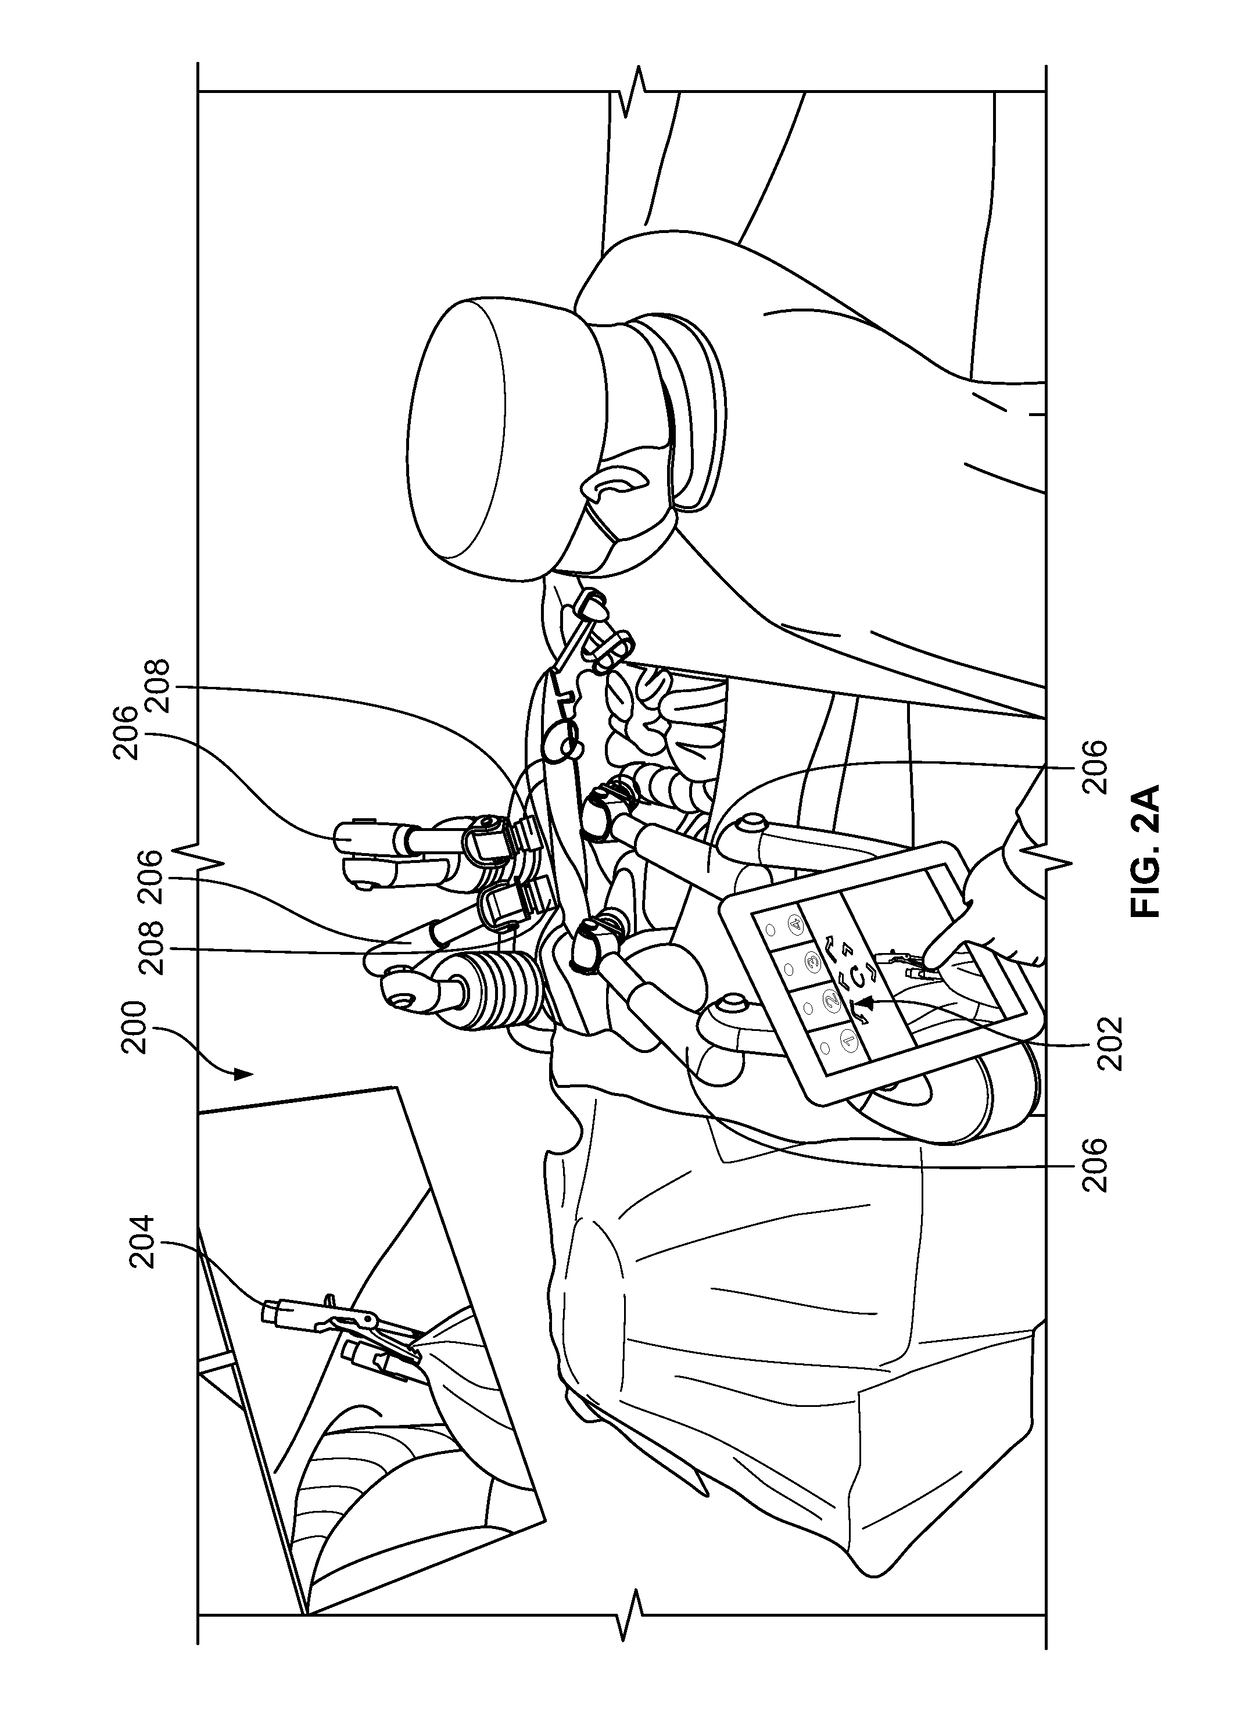 One-operator surgical system and methods of use